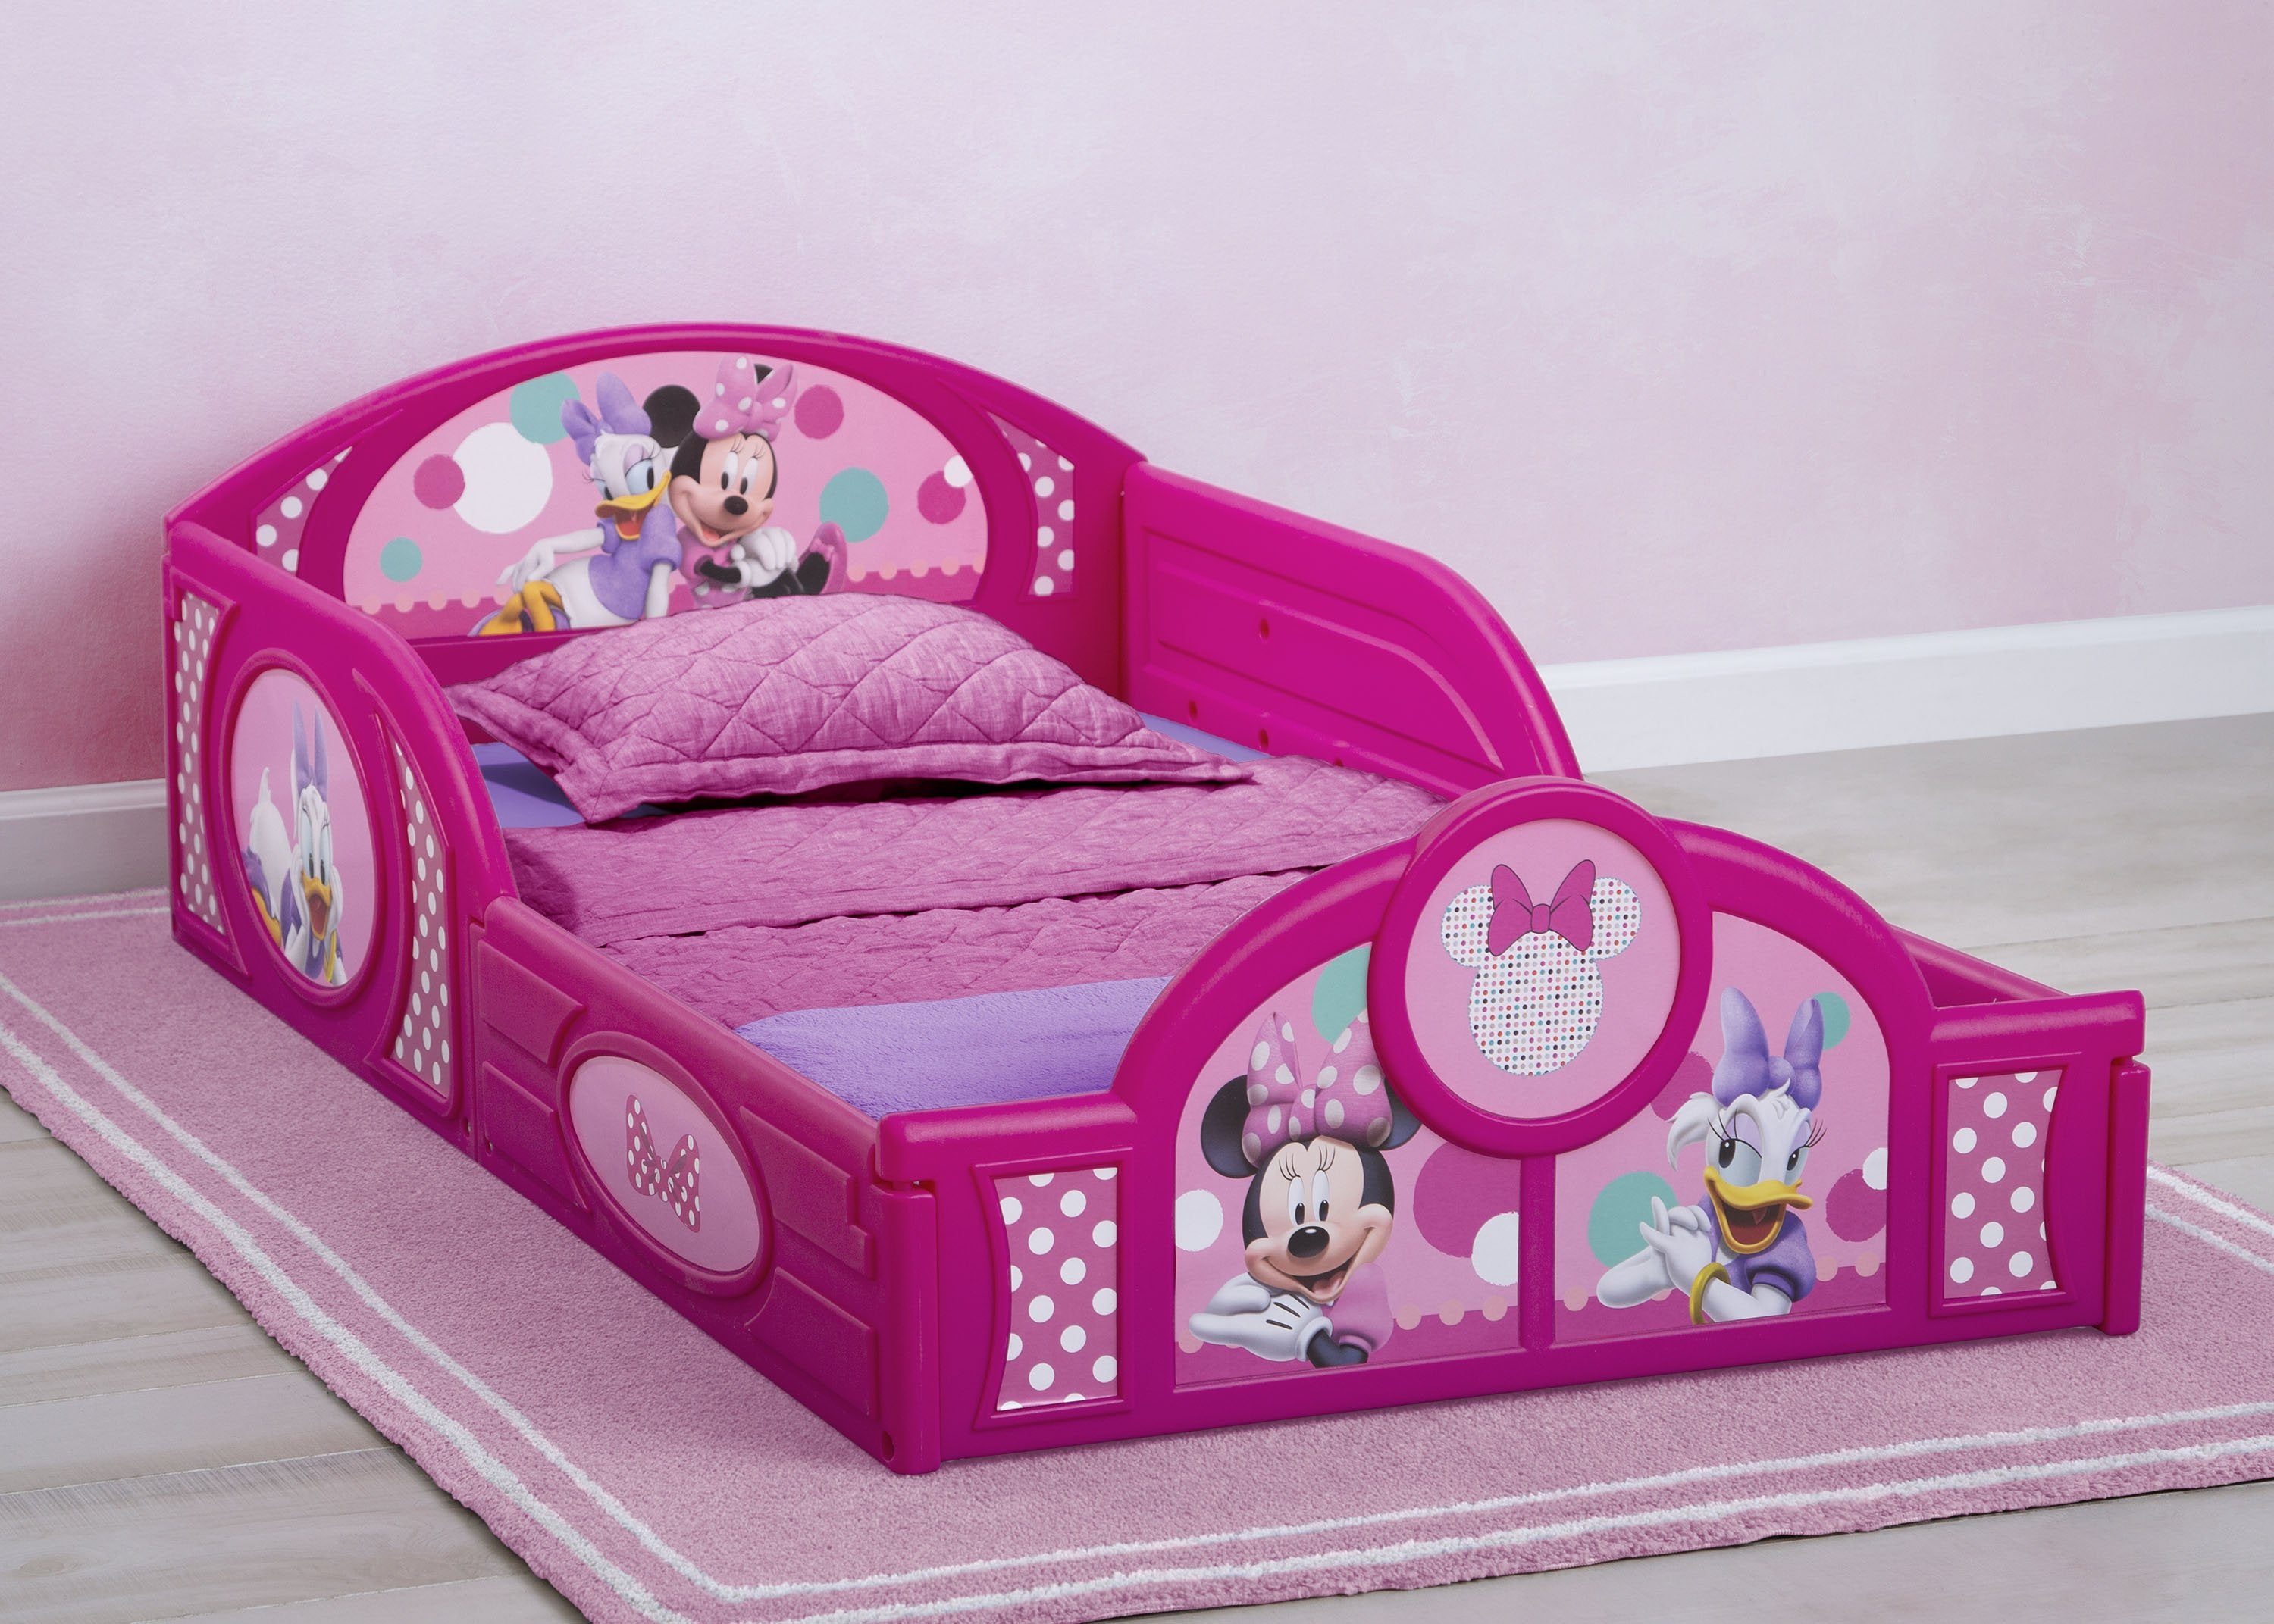 Minnie Mouse Plastic Sleep and Play Toddler Bed - Delta Children